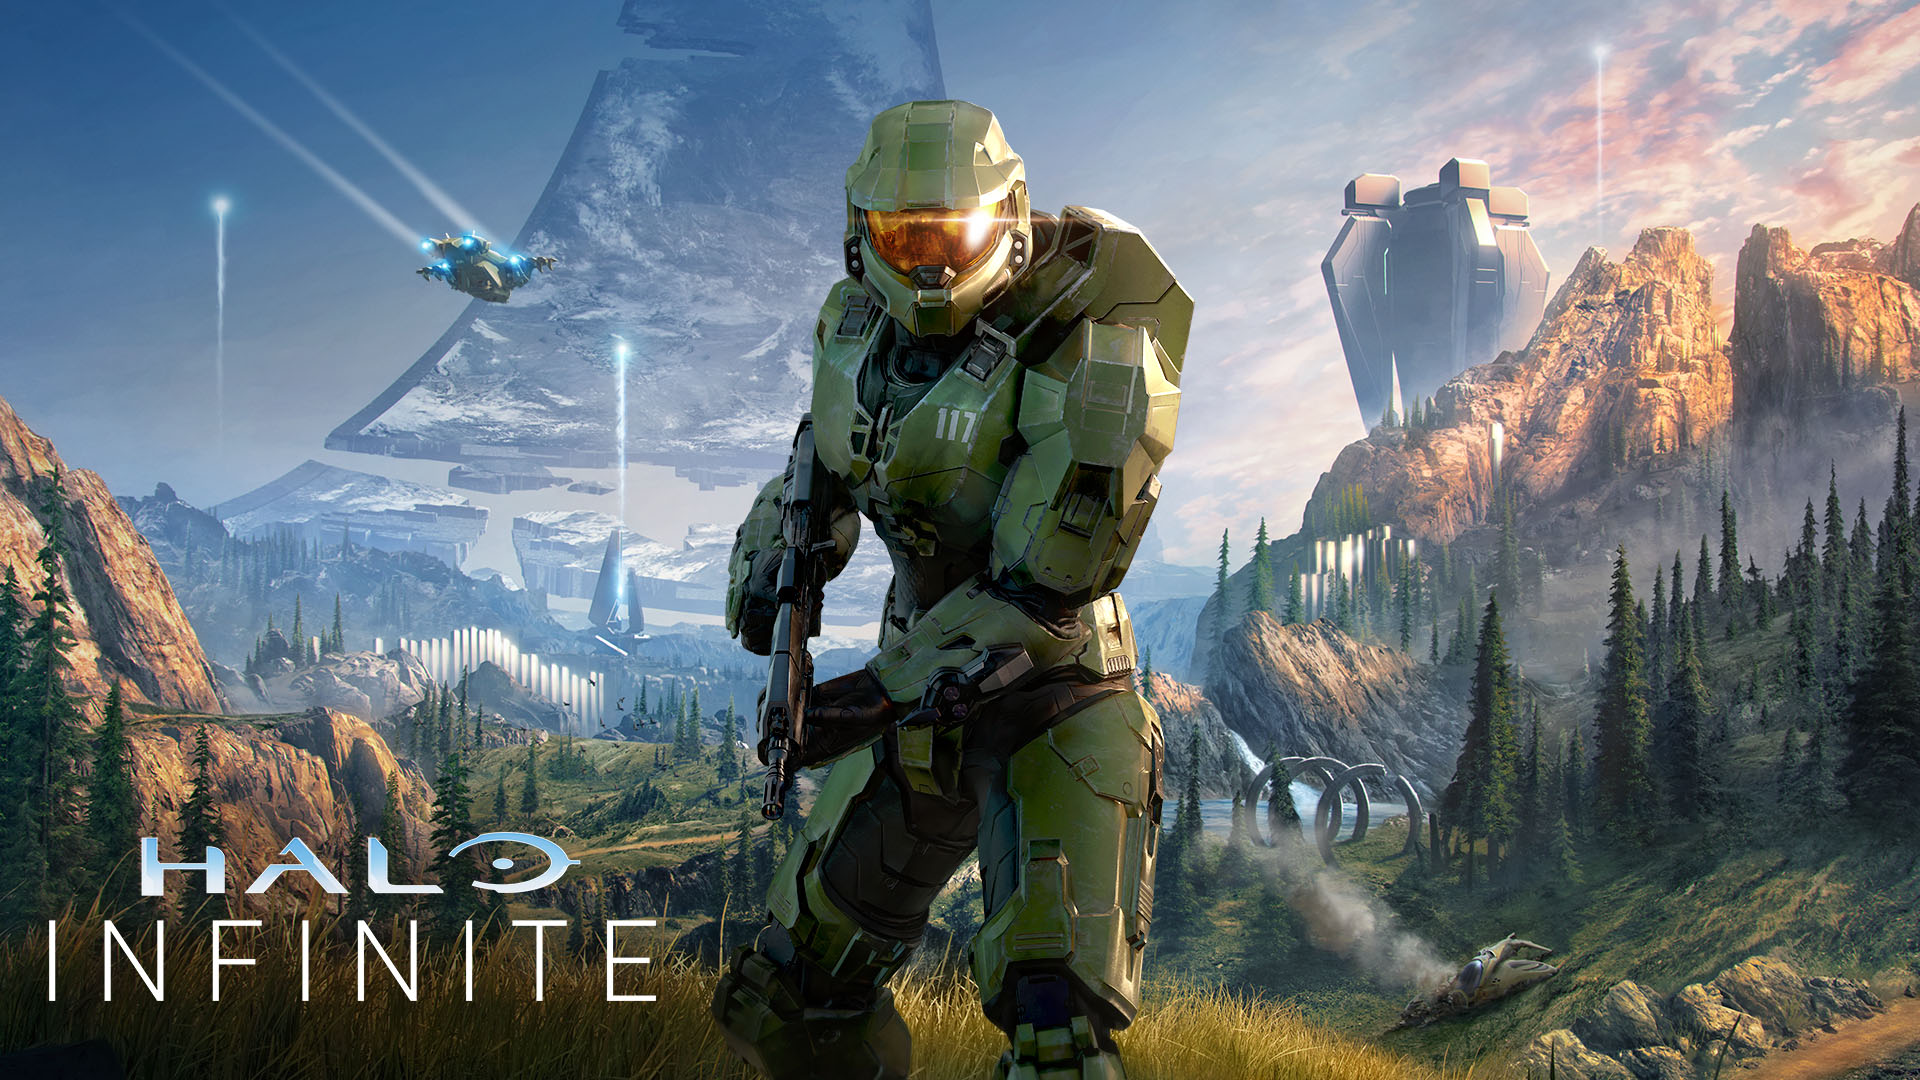 Halo Infinite arriving Dec 8, with a limited edition Xbox Series X and controller on Nov 15